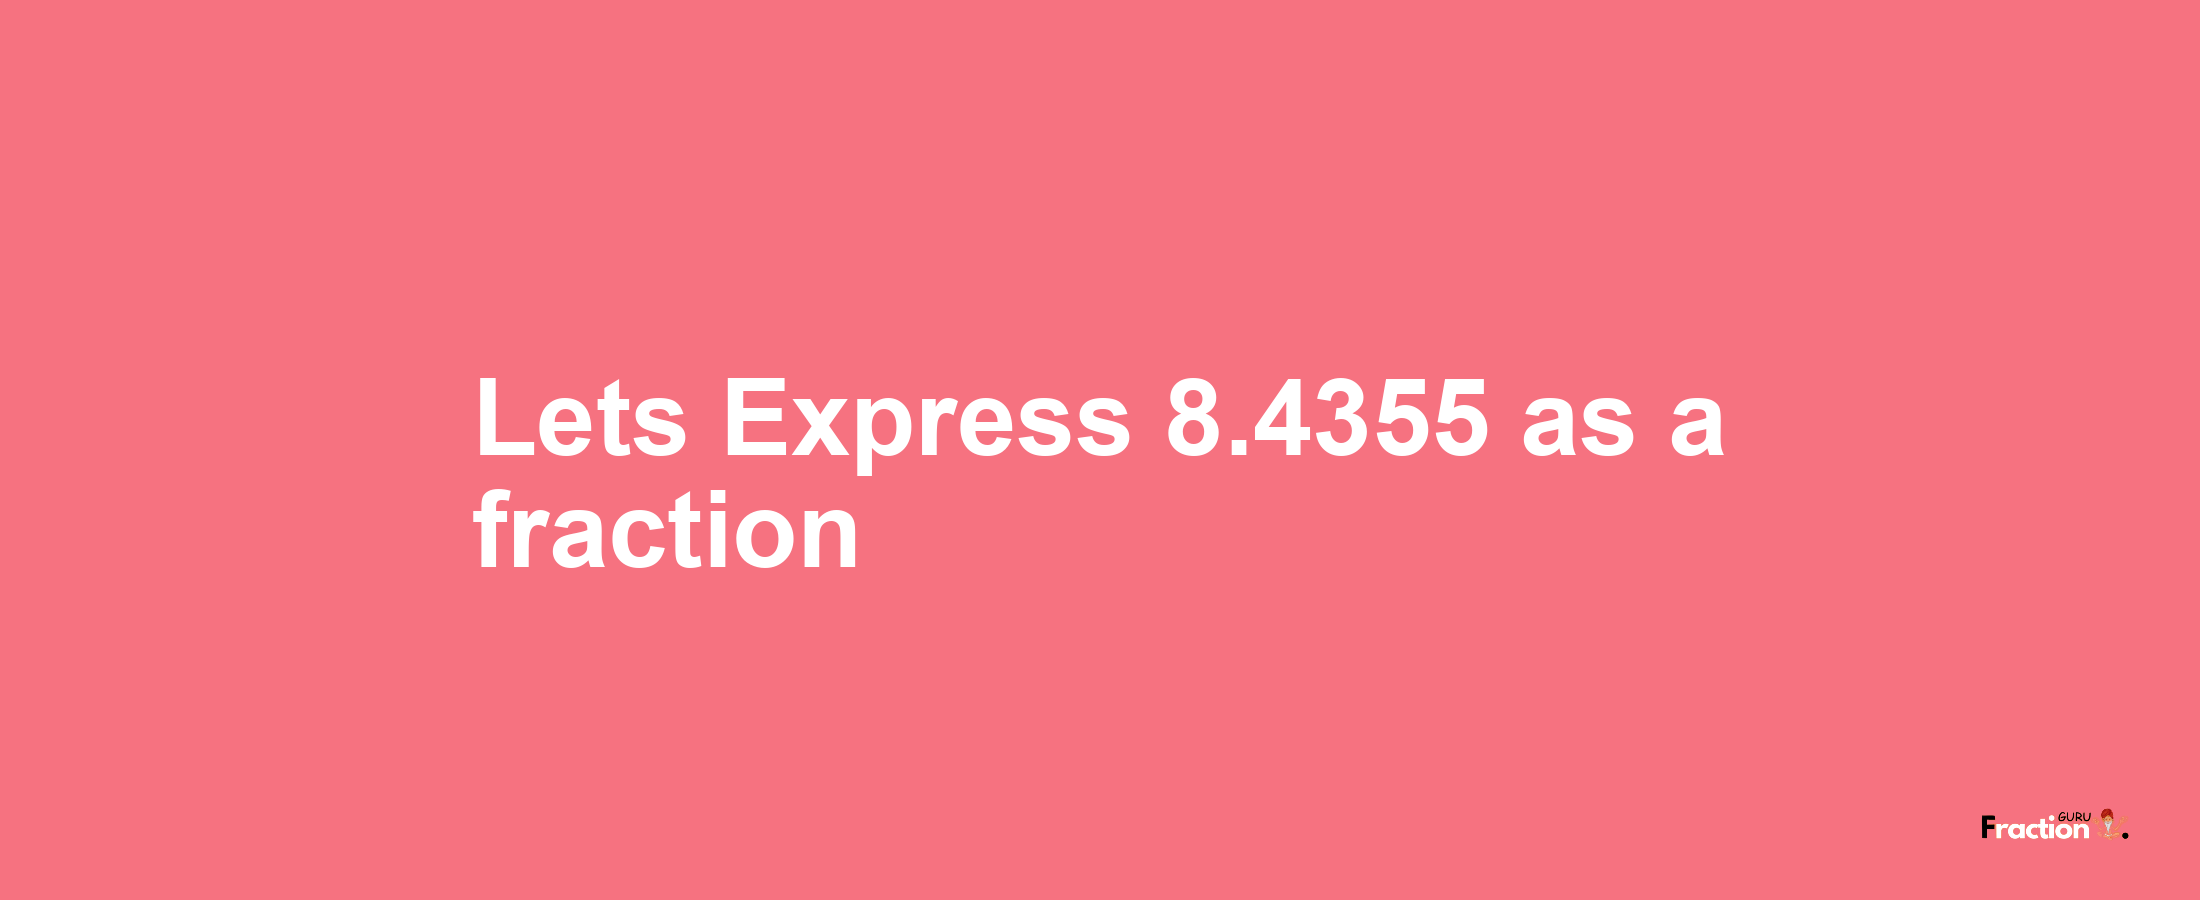 Lets Express 8.4355 as afraction